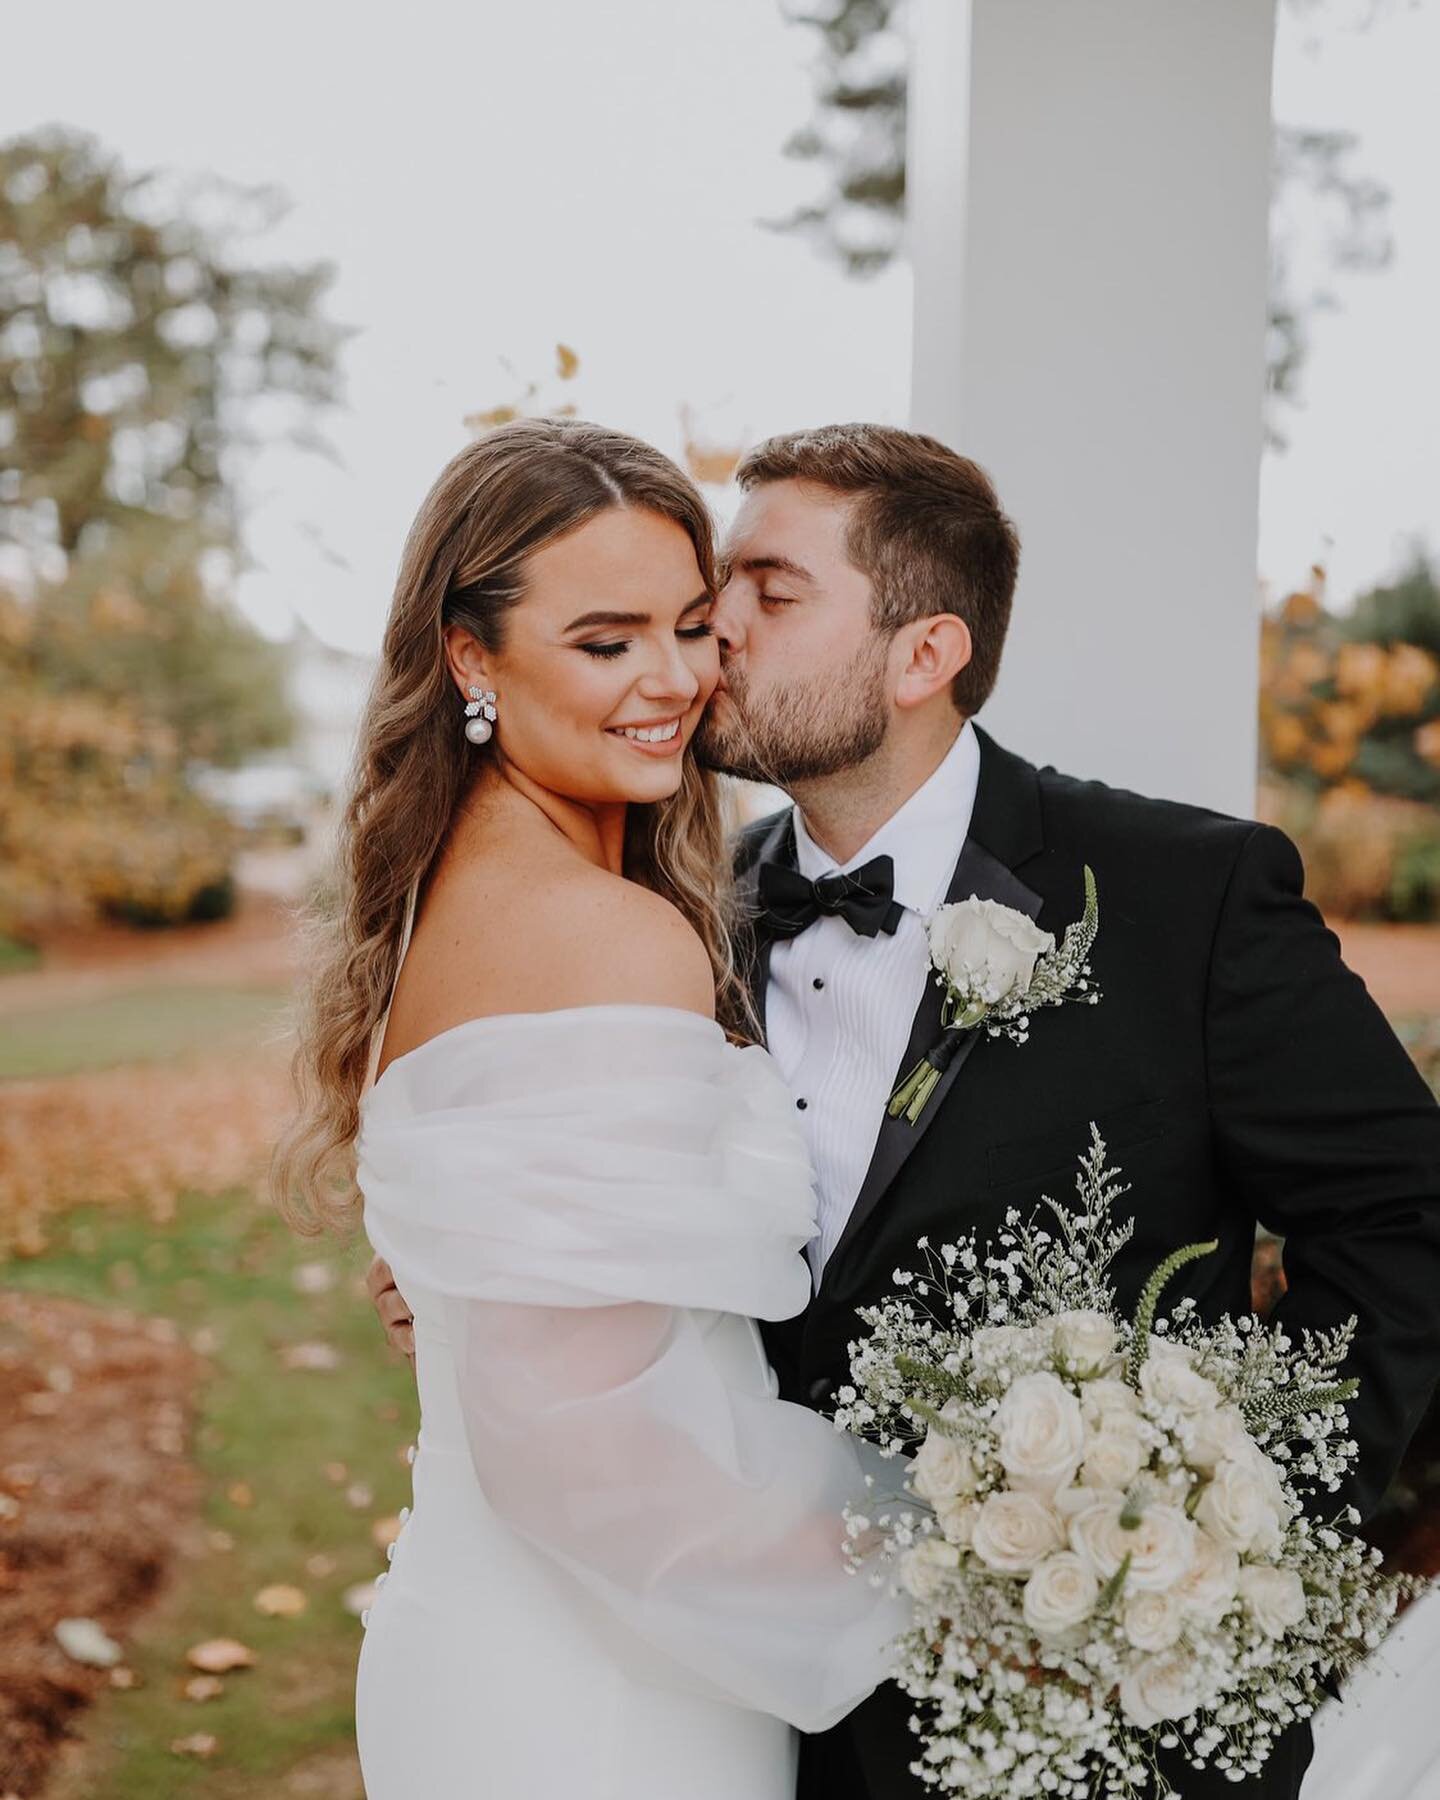 Happy Friday! We are so happy to have been getting back some stunning wedding photos from our fall brides. 

Madison was so lovely to work with. She was such a ray of sunshine and looked absolutely gorgeous in her wedding gown! We loved working with 